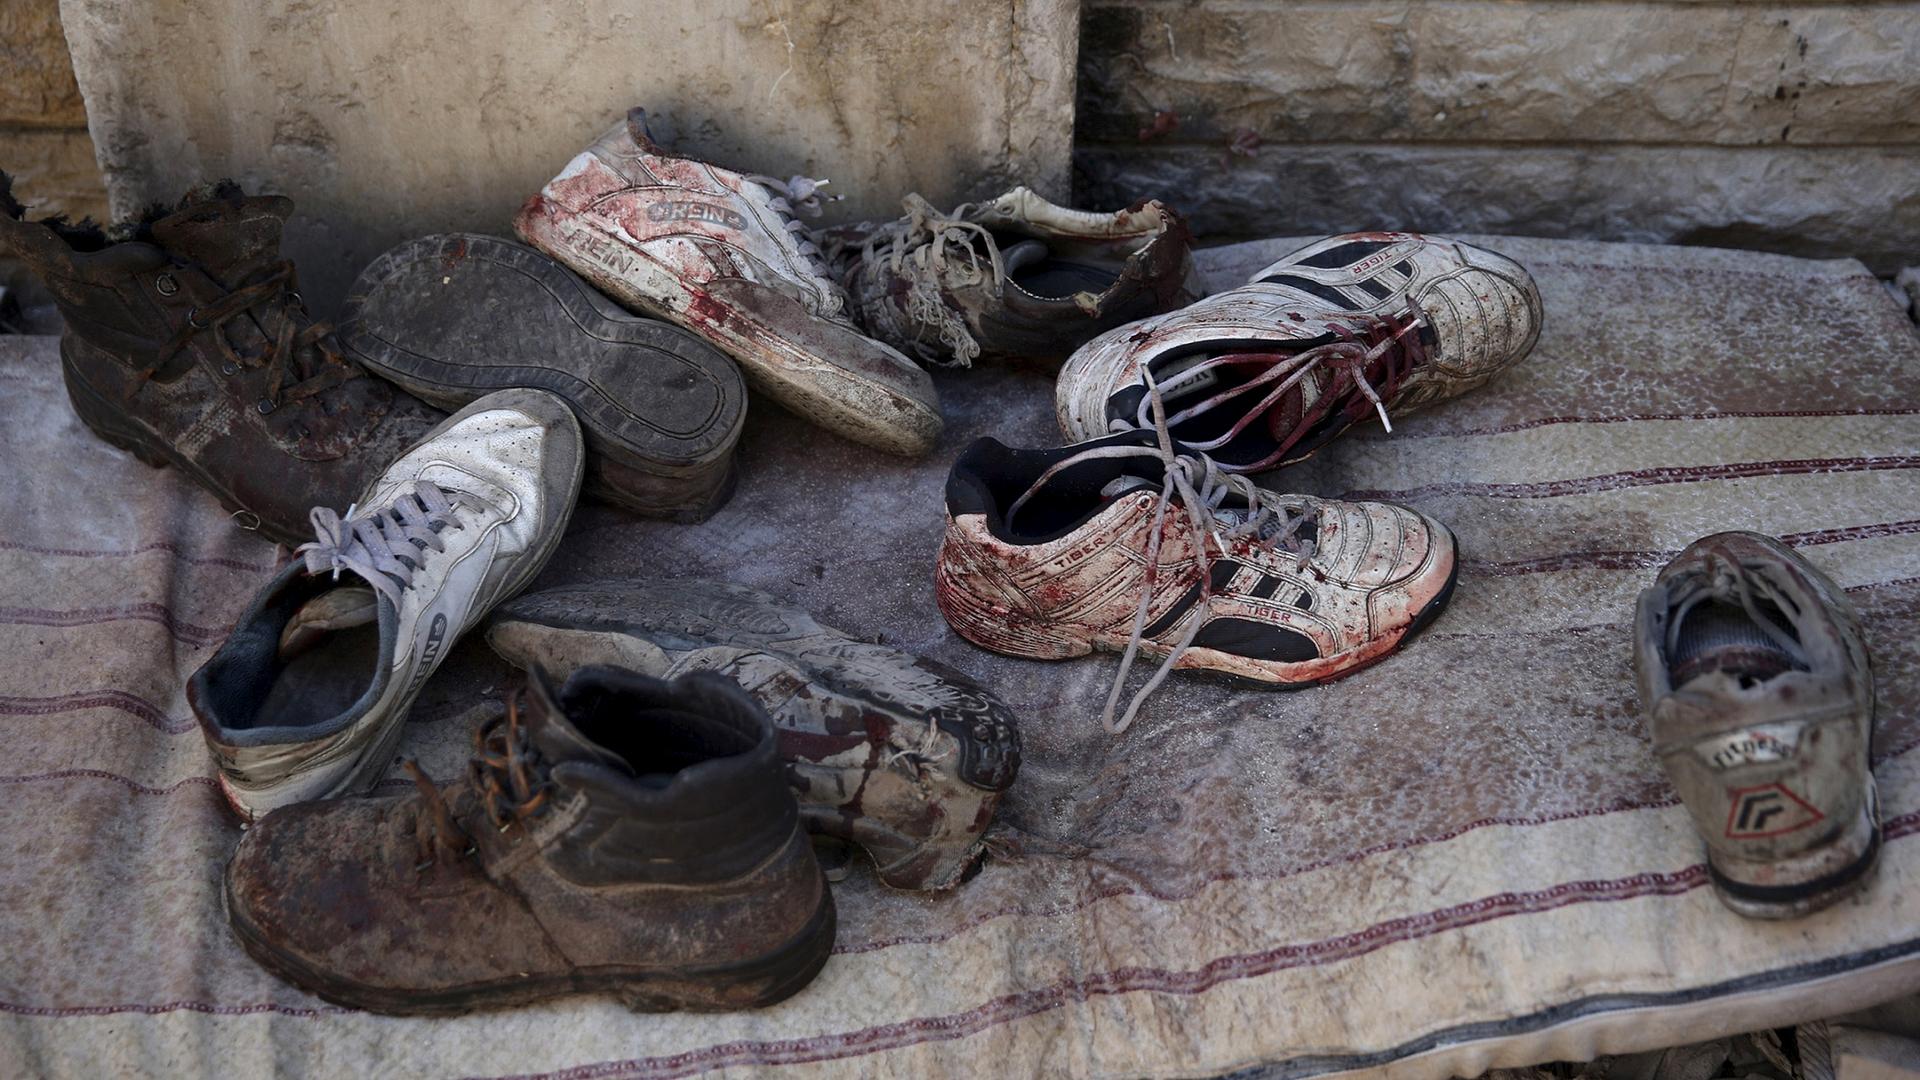 Bloodstained shoes are pictured after Syrian government forces fired missiles on a busy marketplace in Douma, a suburb of Damascus, October 30, 2015.